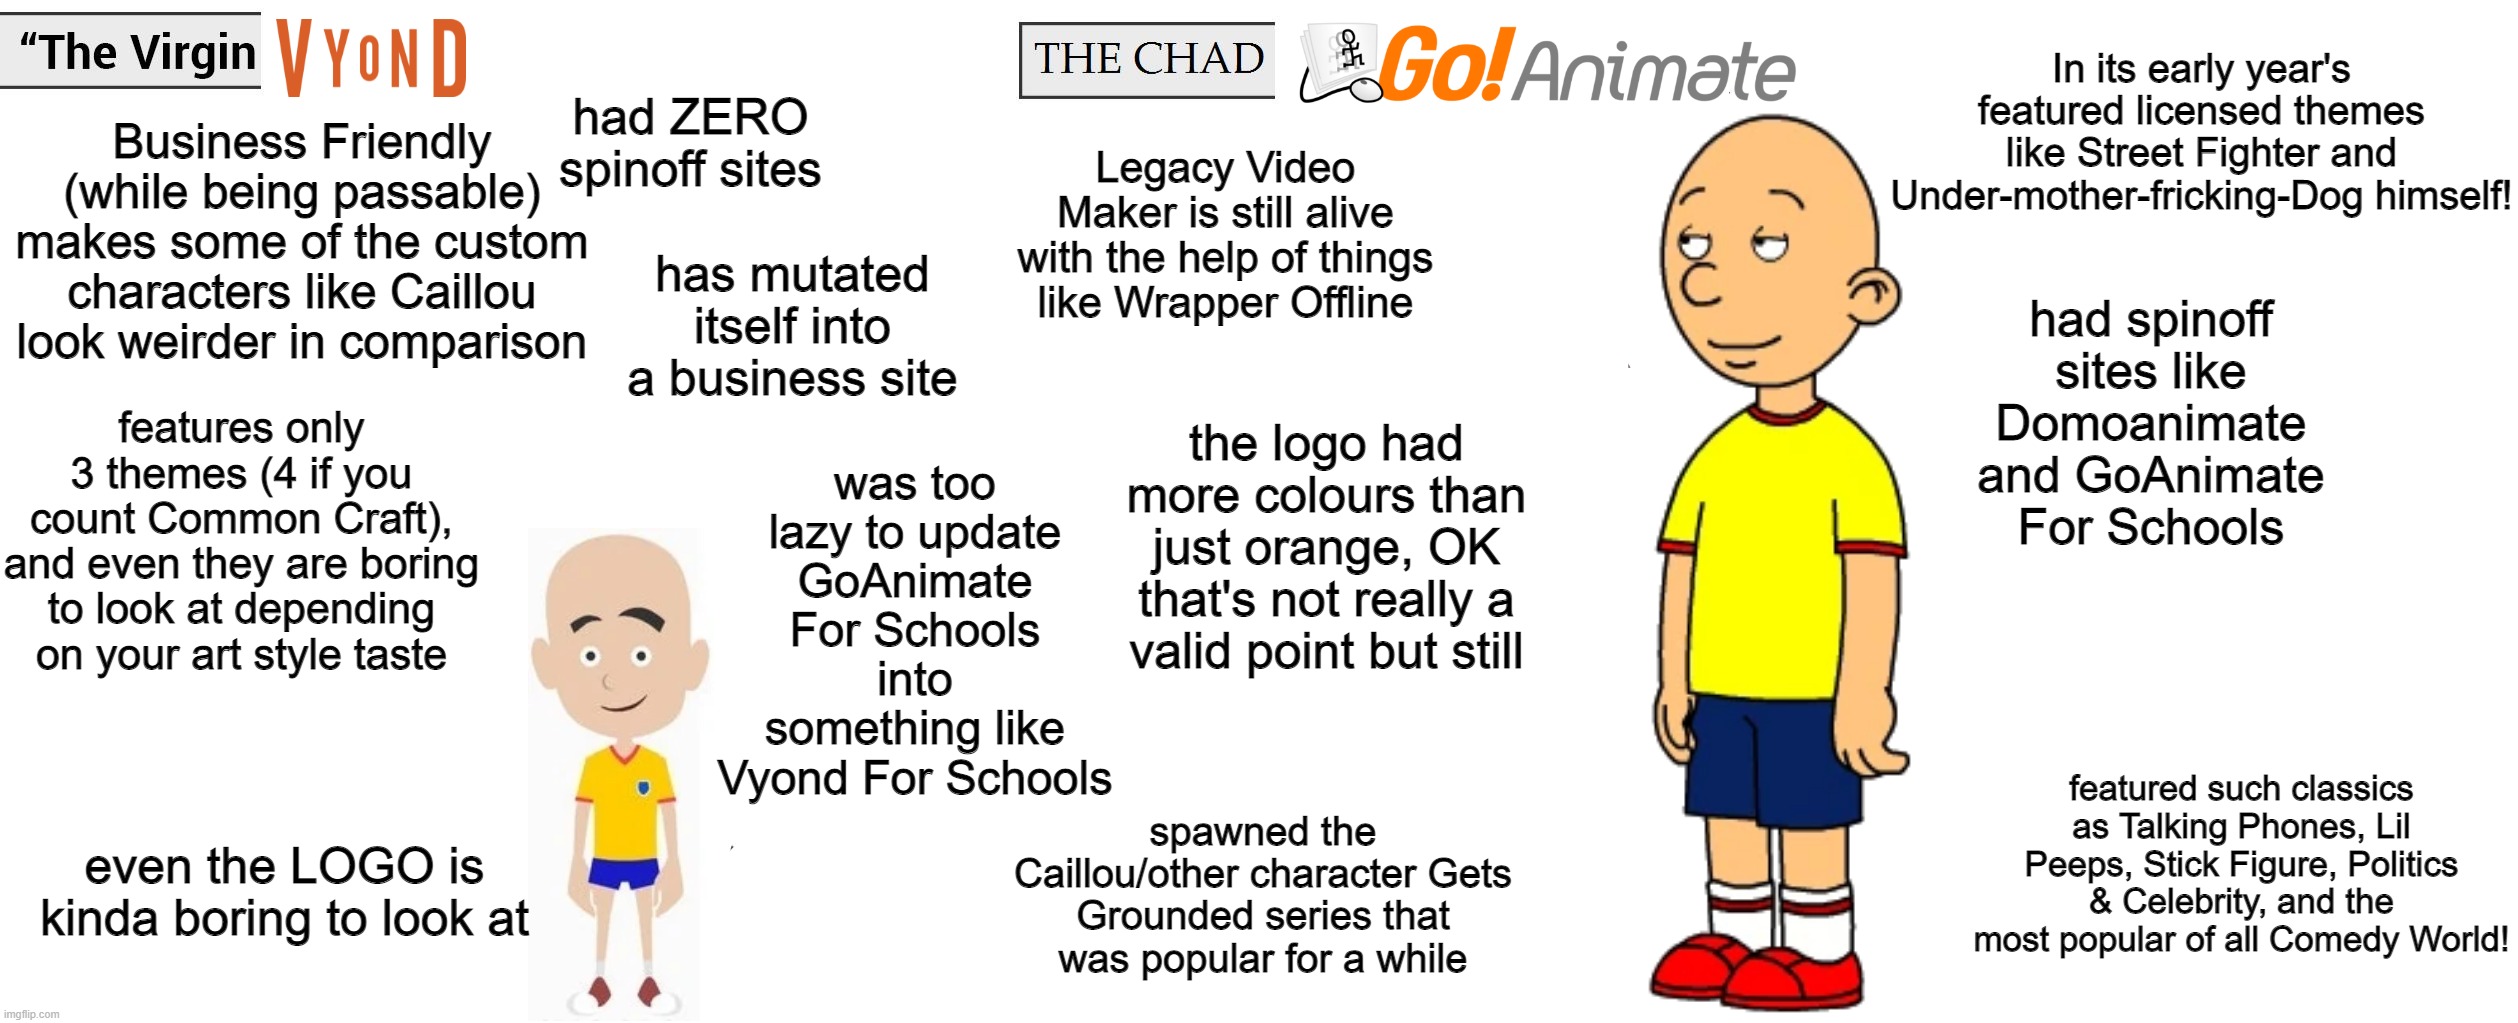 Virgin Vyond VS. Chad Go!Animate | In its early year's featured licensed themes like Street Fighter and Under-mother-fricking-Dog himself! had ZERO spinoff sites; had spinoff sites like Domoanimate and GoAnimate For Schools; Business Friendly (while being passable) makes some of the custom characters like Caillou look weirder in comparison; Legacy Video Maker is still alive with the help of things like Wrapper Offline; has mutated itself into a business site; was too lazy to update GoAnimate For Schools into something like Vyond For Schools; features only 3 themes (4 if you count Common Craft), and even they are boring to look at depending on your art style taste; the logo had more colours than just orange, OK that's not really a valid point but still; featured such classics as Talking Phones, Lil Peeps, Stick Figure, Politics & Celebrity, and the most popular of all Comedy World! spawned the Caillou/other character Gets Grounded series that was popular for a while; even the LOGO is kinda boring to look at | image tagged in virgin and chad,goanimate,memes | made w/ Imgflip meme maker